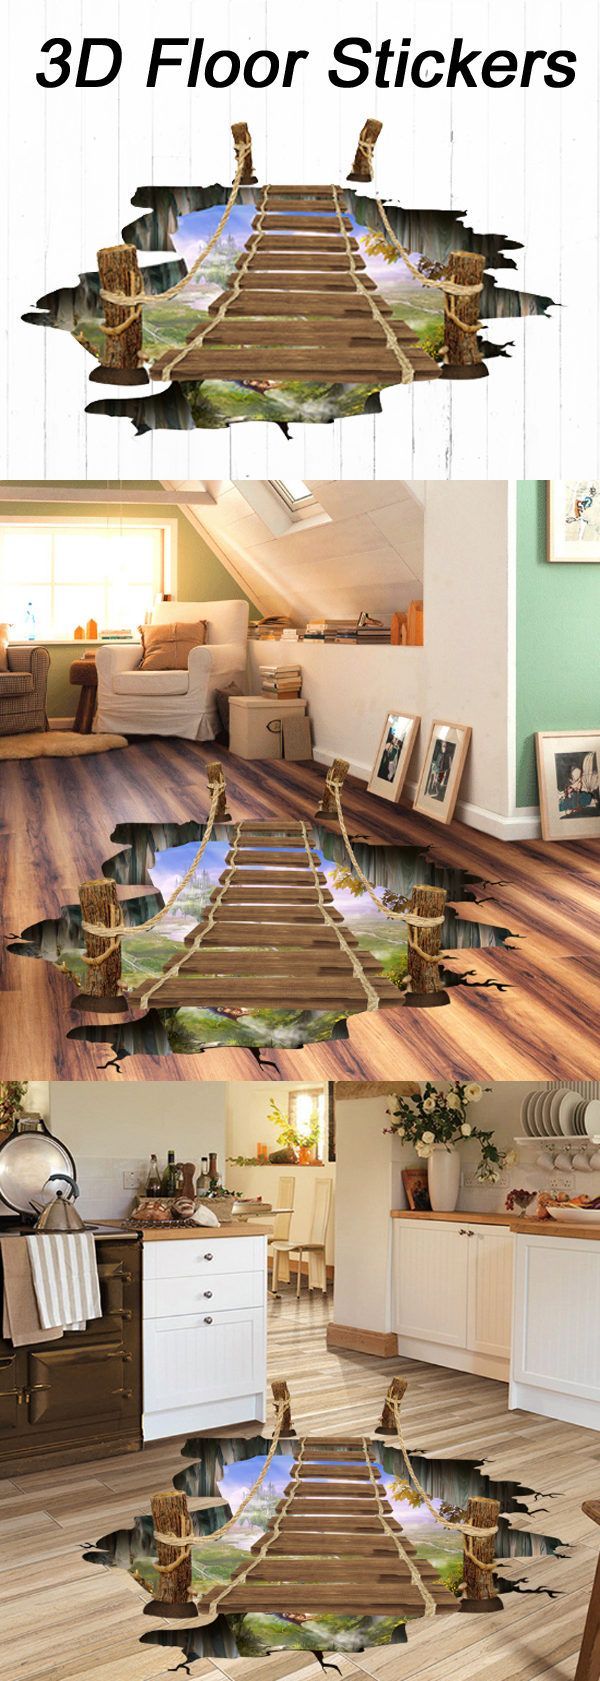 US$6.99 36% 3D Wooden Bridge Living Room Bedroom Animals Floor Home Background Wall Decor Creative Stickers Home Decor from Home and Garden on banggood.com -   23 recycled crafts for teens
 ideas